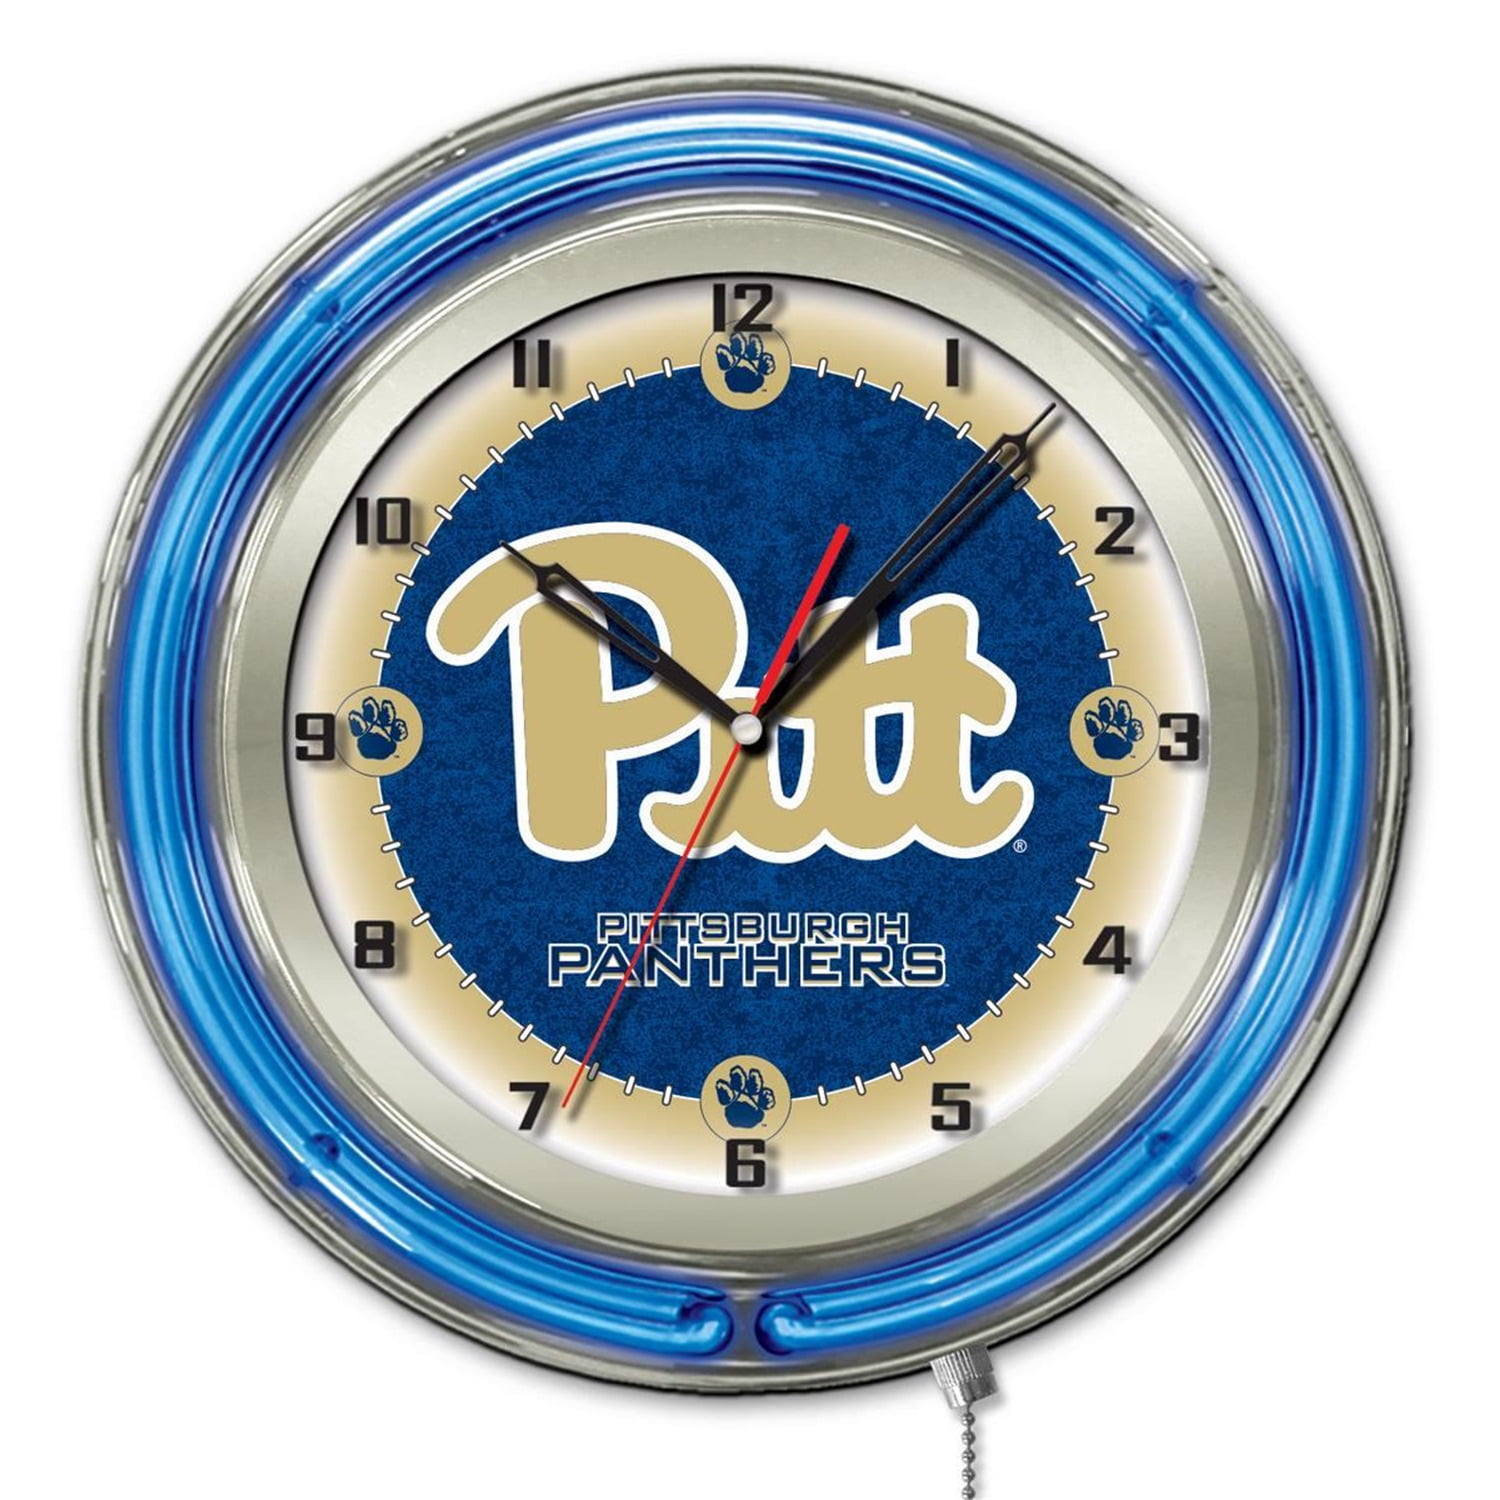 Pittsburgh Pitt Panthers 12 inch Round Wall Clock Chrome Plated 